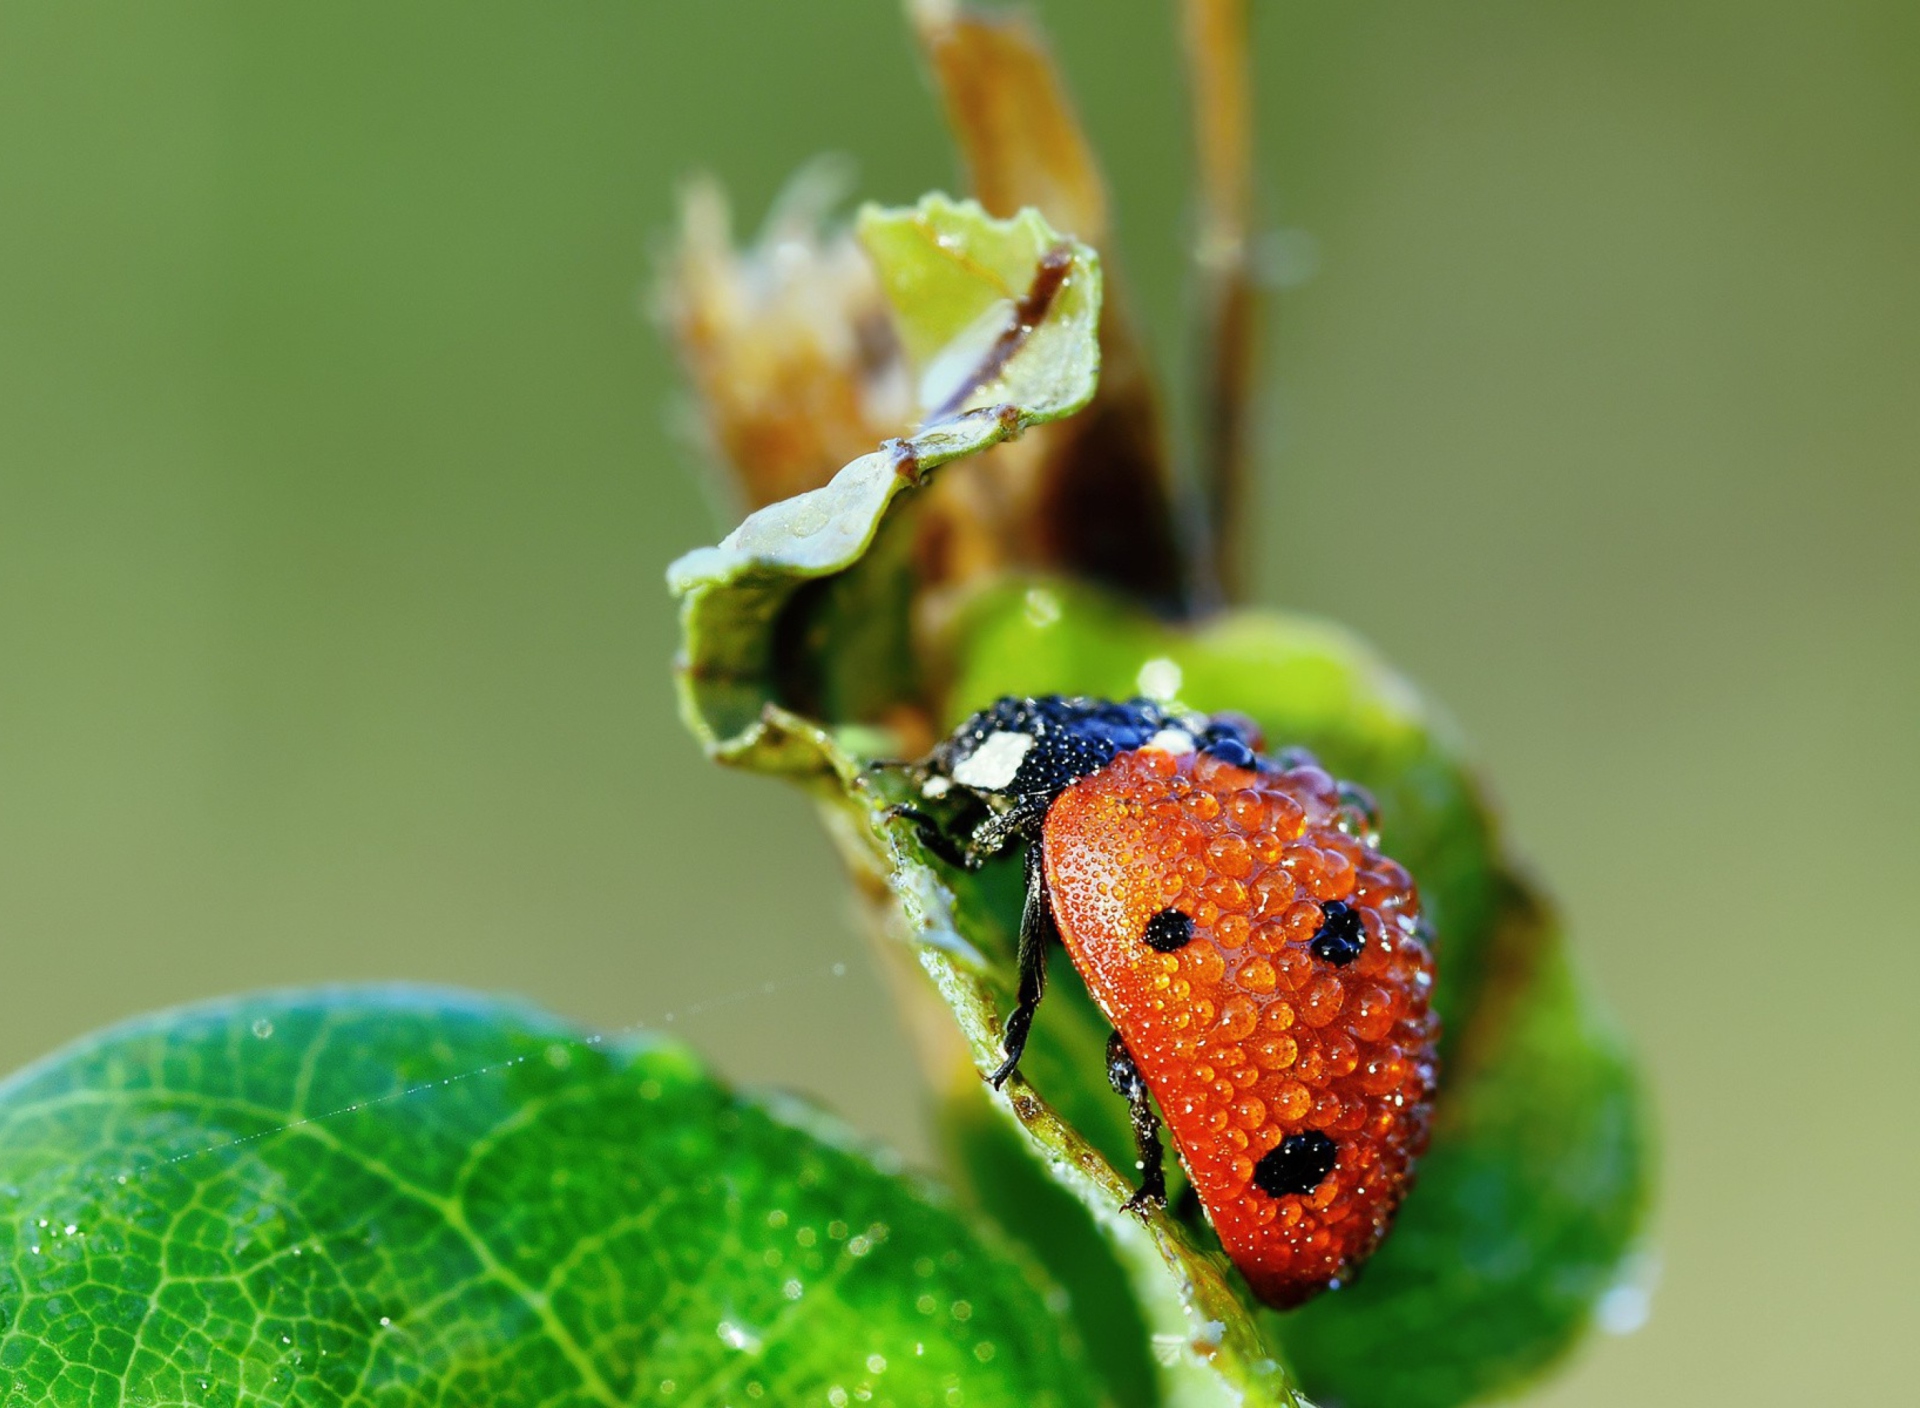 Das Ladybug Covered With Dew Drops Wallpaper 1920x1408